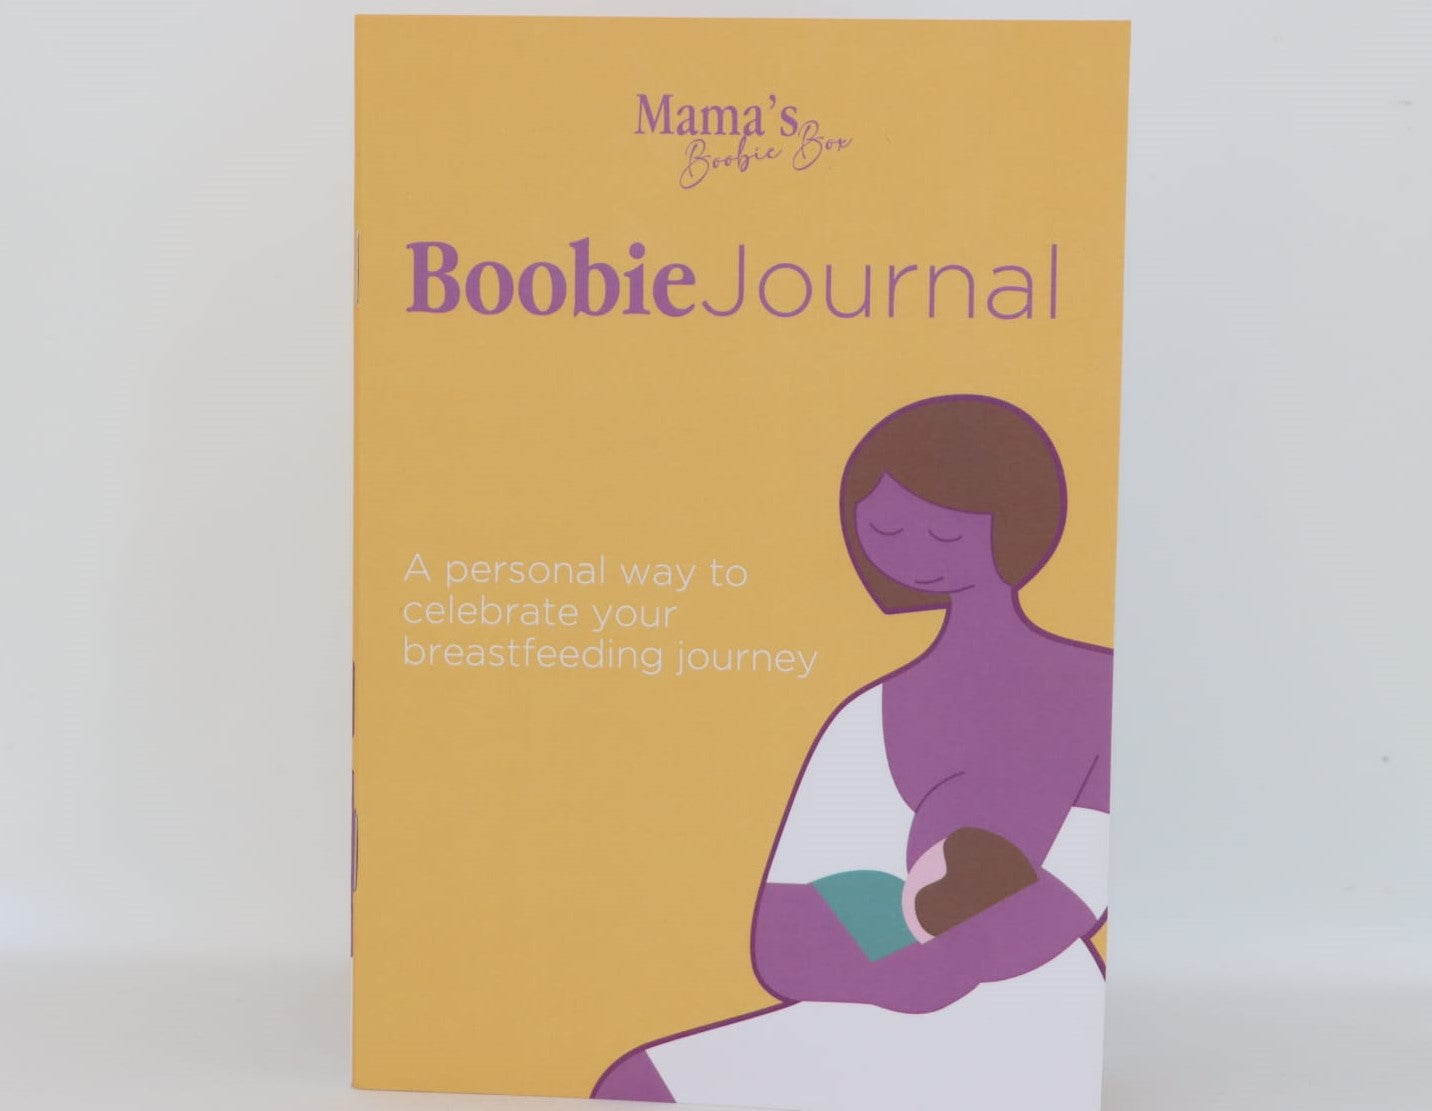 Boobie Journal has launched